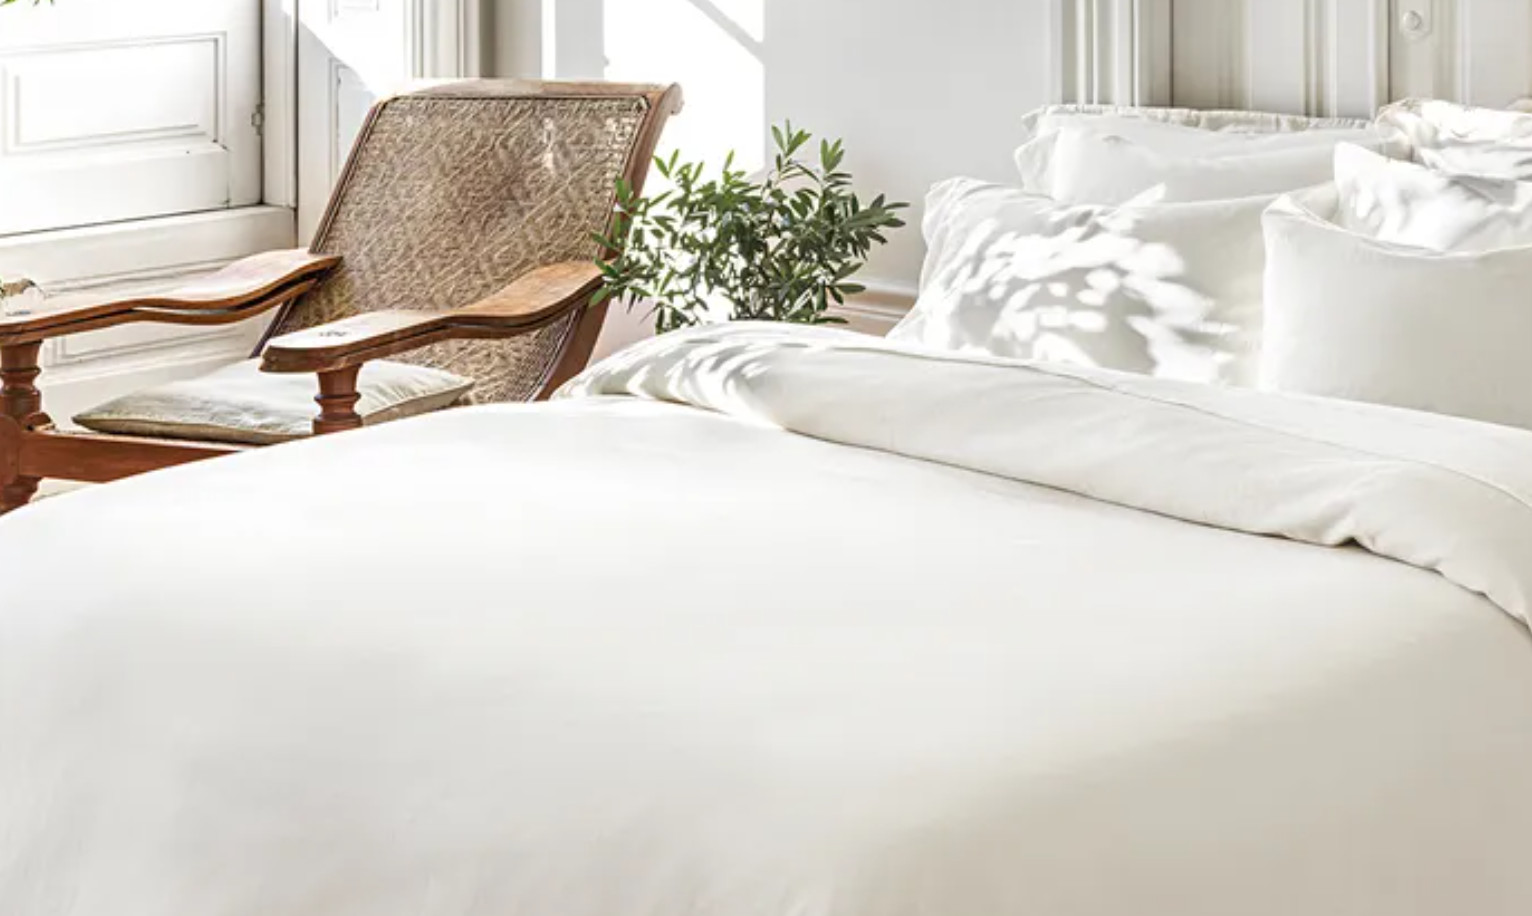 riley home cashmere sheets